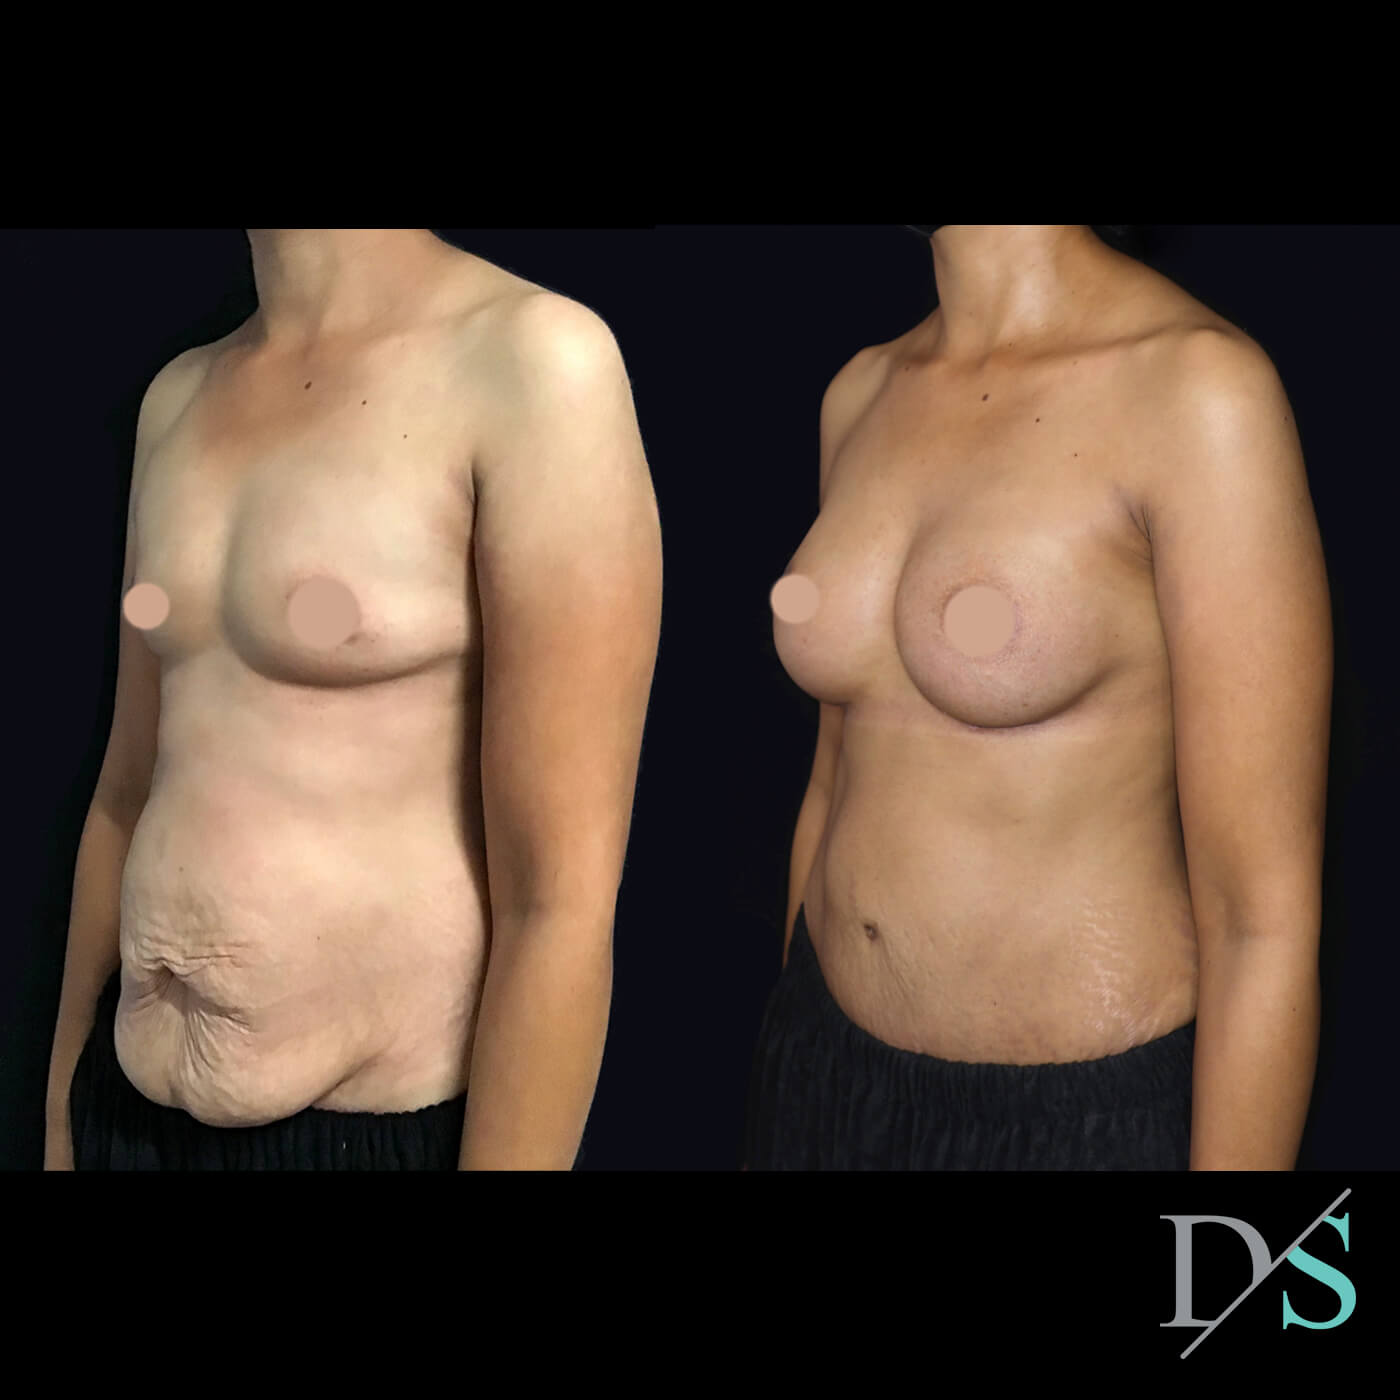 Post pregnancy abdominoplasty: can I claim a rebate for my tummy tuck? - 1